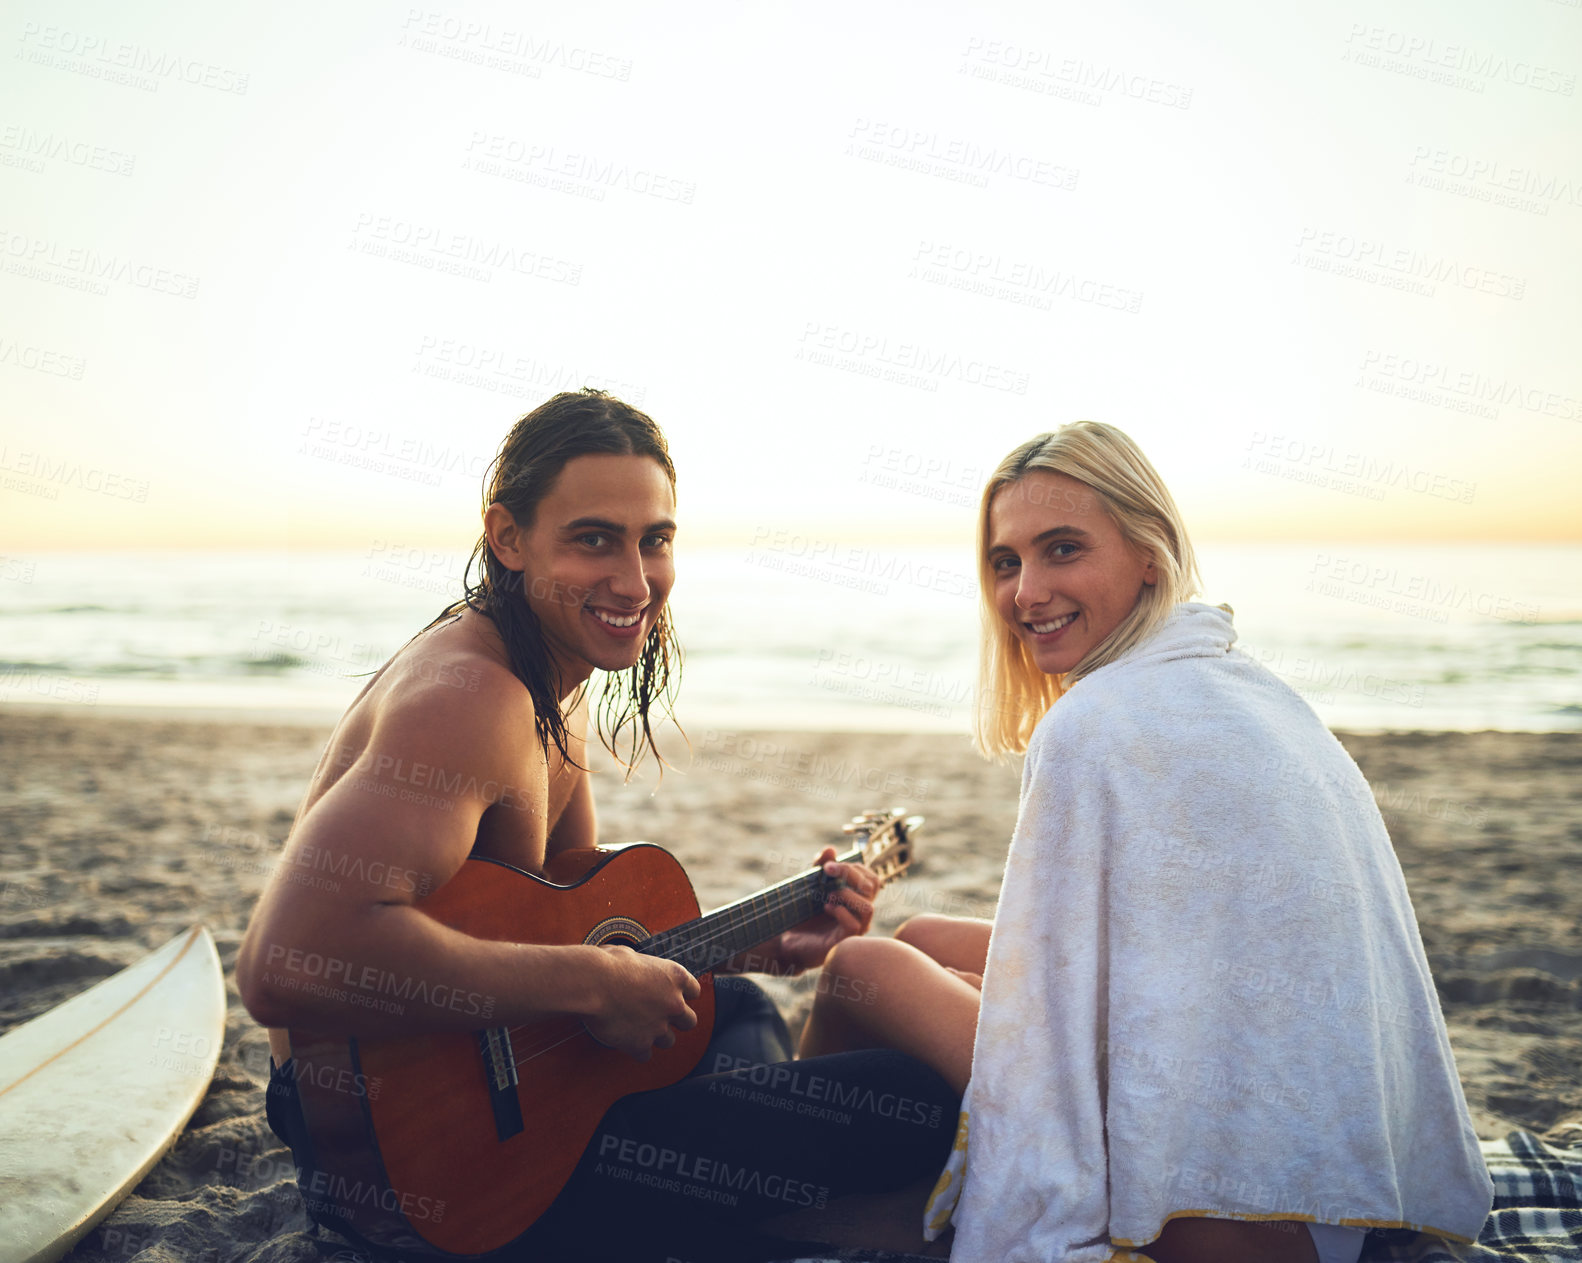 Buy stock photo Rearview portrait of a smiling young couple during their date on the beach at sunset